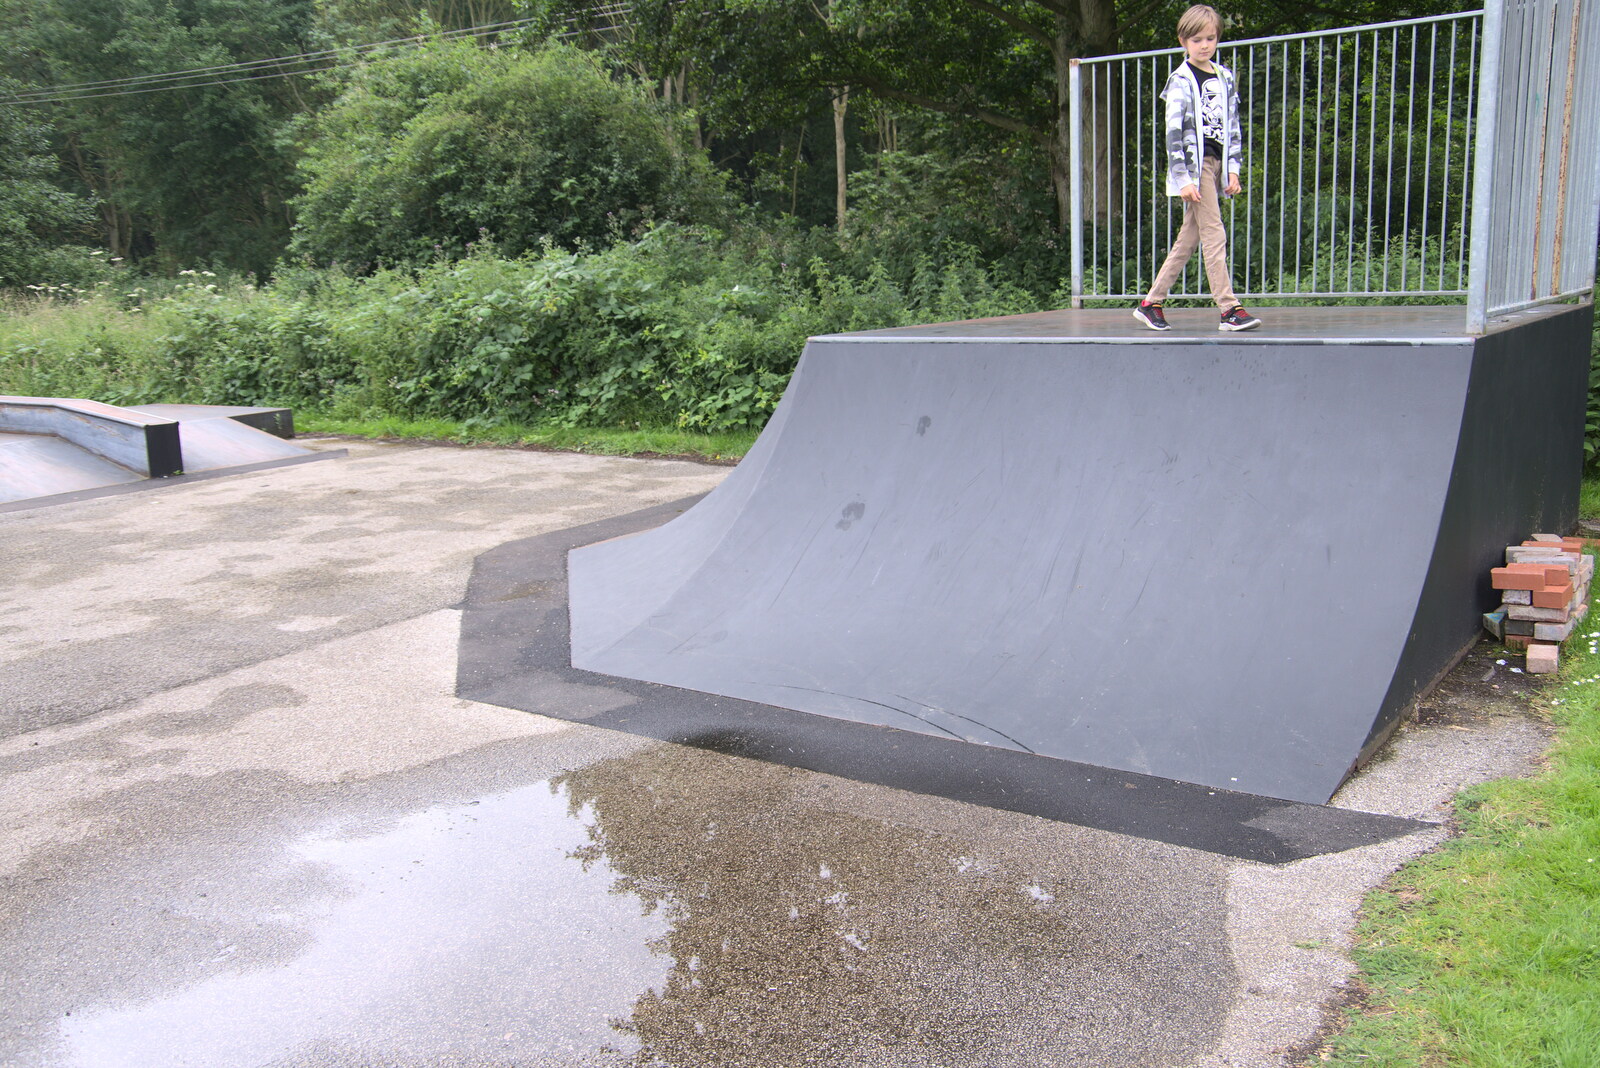 Harry walks around from New Kittens, and The Skate Park, Town Moors, Eye, Suffolk - 3rd July 2021